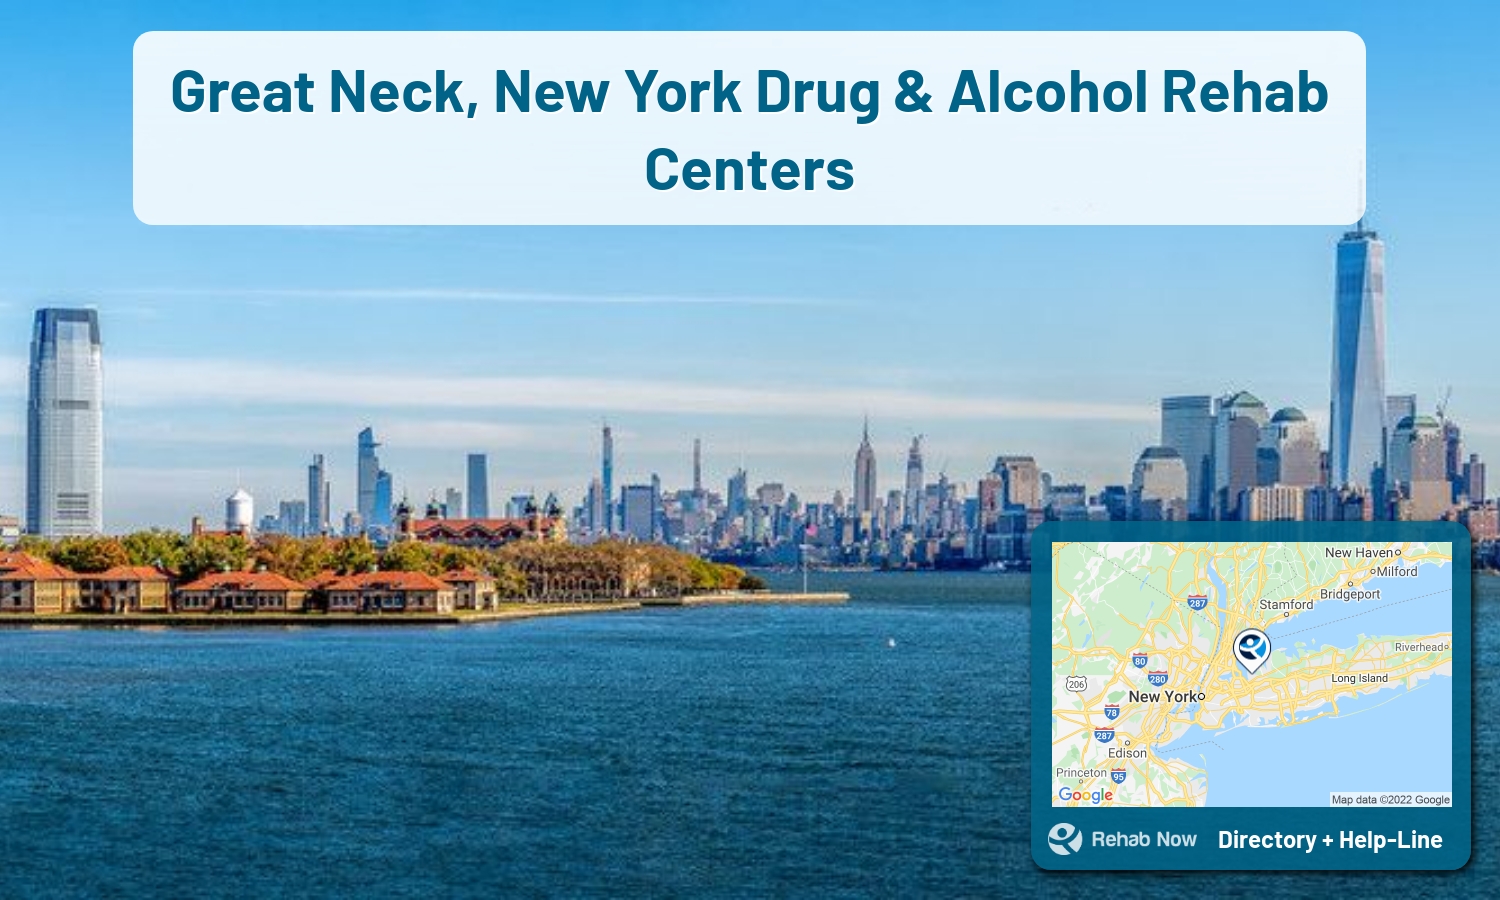 Great Neck, NY Treatment Centers. Find drug rehab in Great Neck, New York, or detox and treatment programs. Get the right help now!